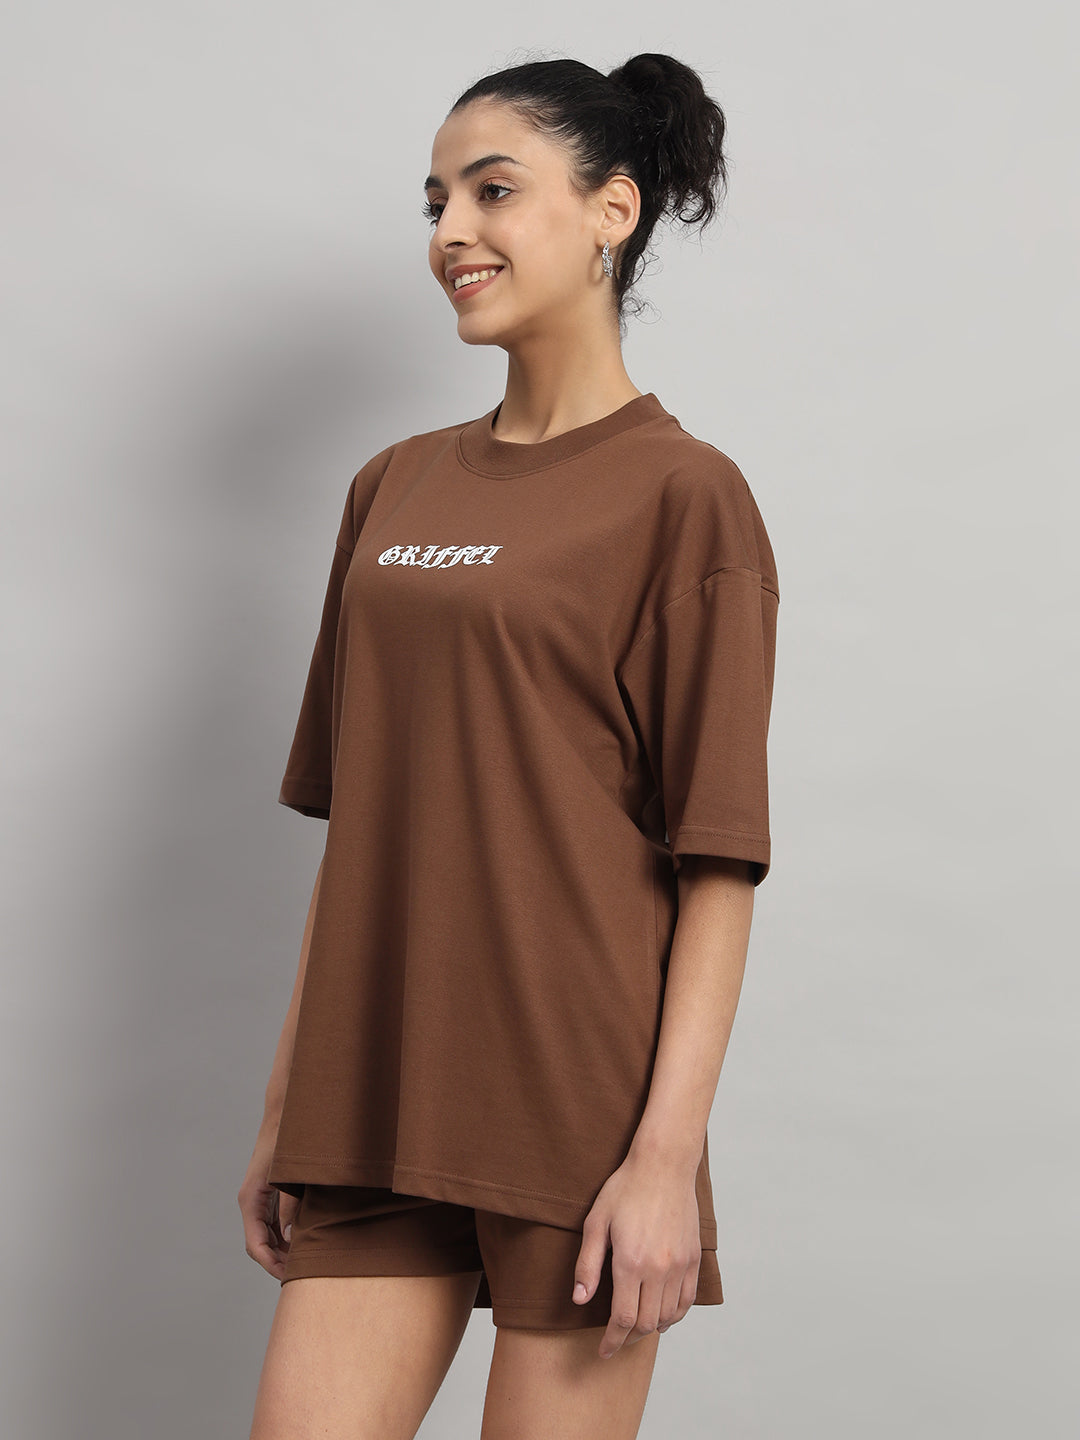 MAKE A MOVE Oversized T-shirt - griffel